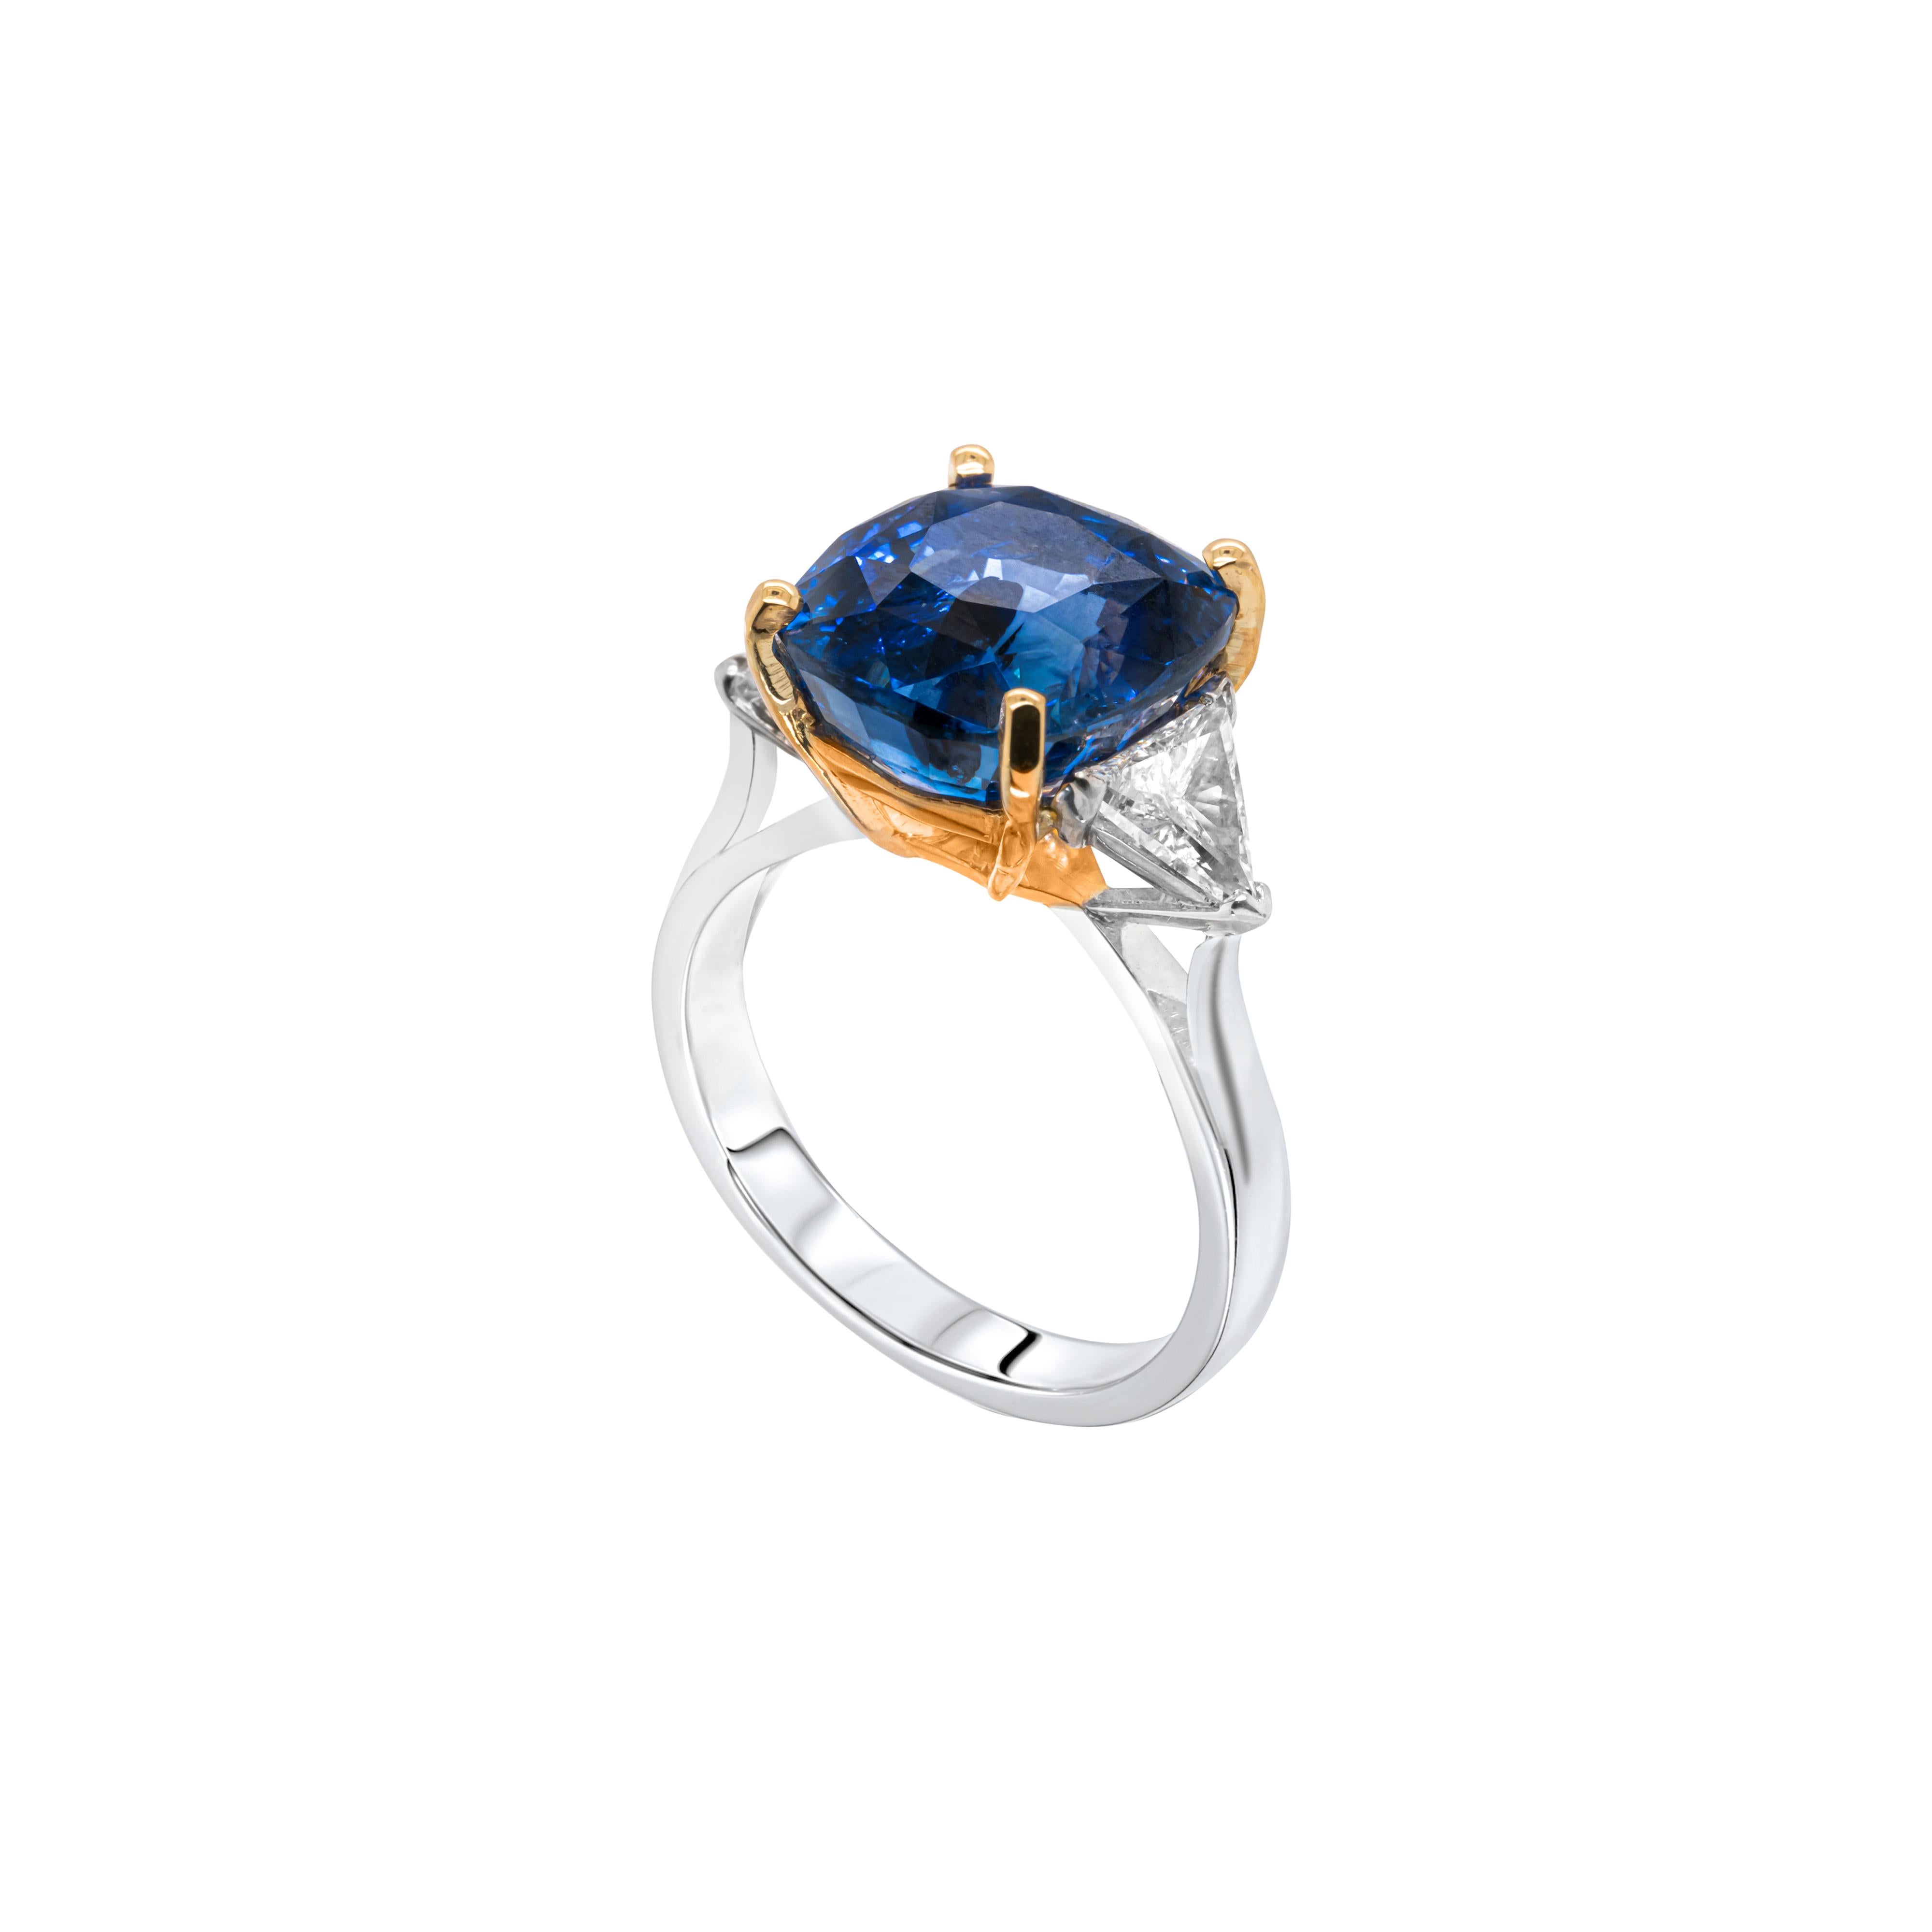 This stunning three stone engagement ring features a cushion cut blue sapphire weighing 9.73 carats mounted in a four claw, 18ct yellow gold setting. The gemstone is perfectly accompanied by a trillion cut diamond on either side with a combined